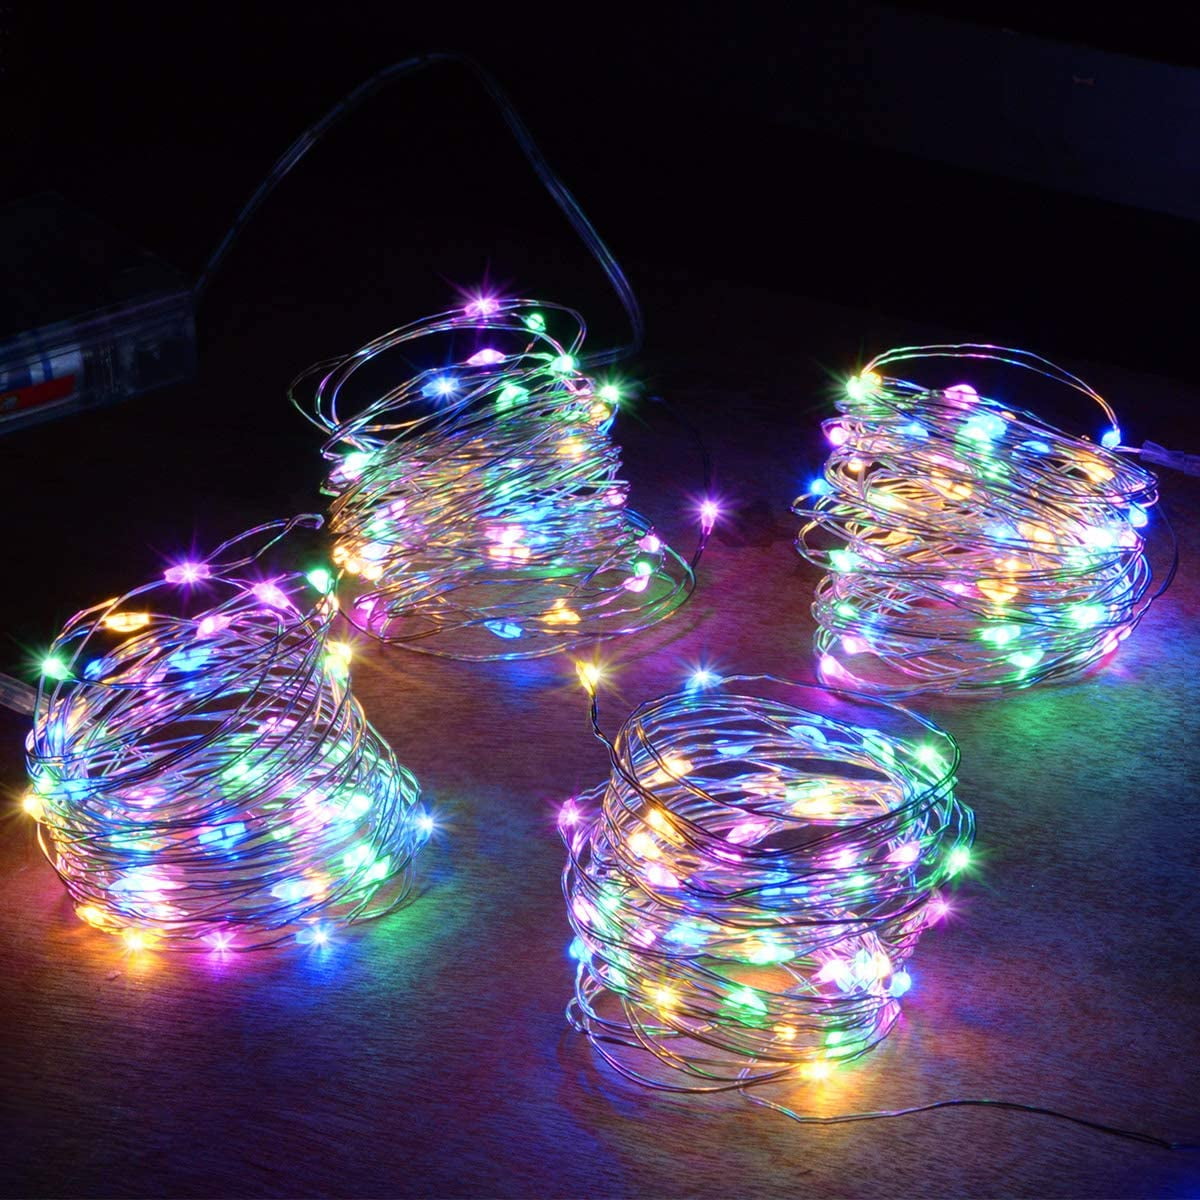 Flower Fairy Lights 10 LED String Battery Power Operated 2AA Multi Color New 